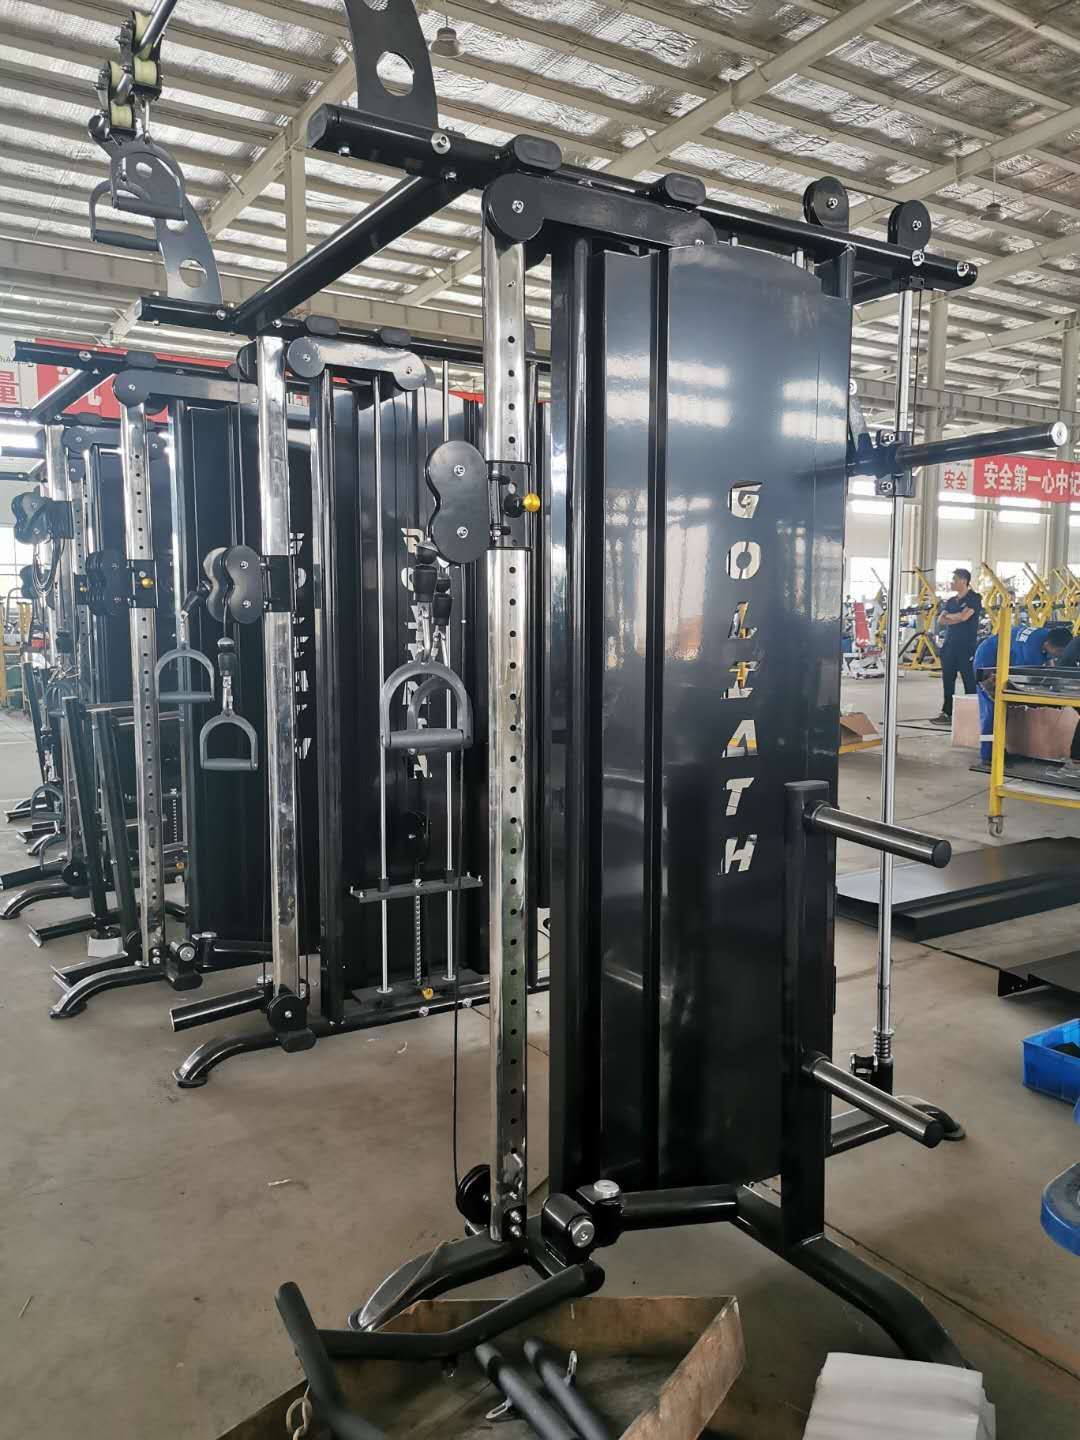 The Goliath Full Commercial Multi Functional Trainer & Smith Machine with HUGE 2 x 100kg Weight Stacks